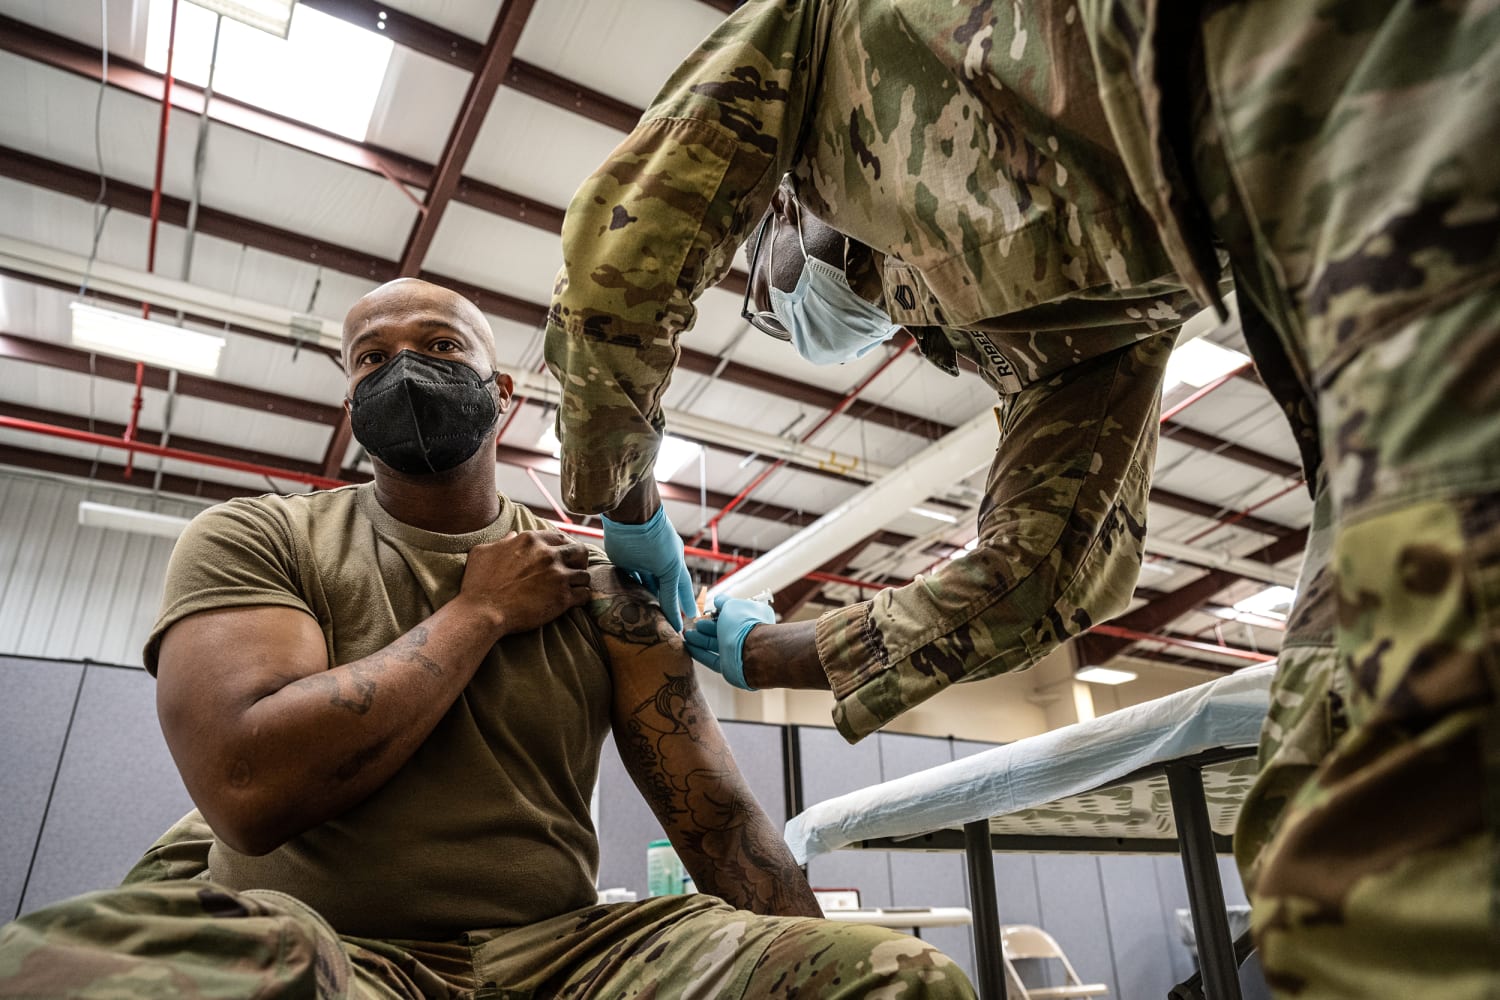 About 12,000 members of Air Force, Space Force remain unvaccinated at deadline